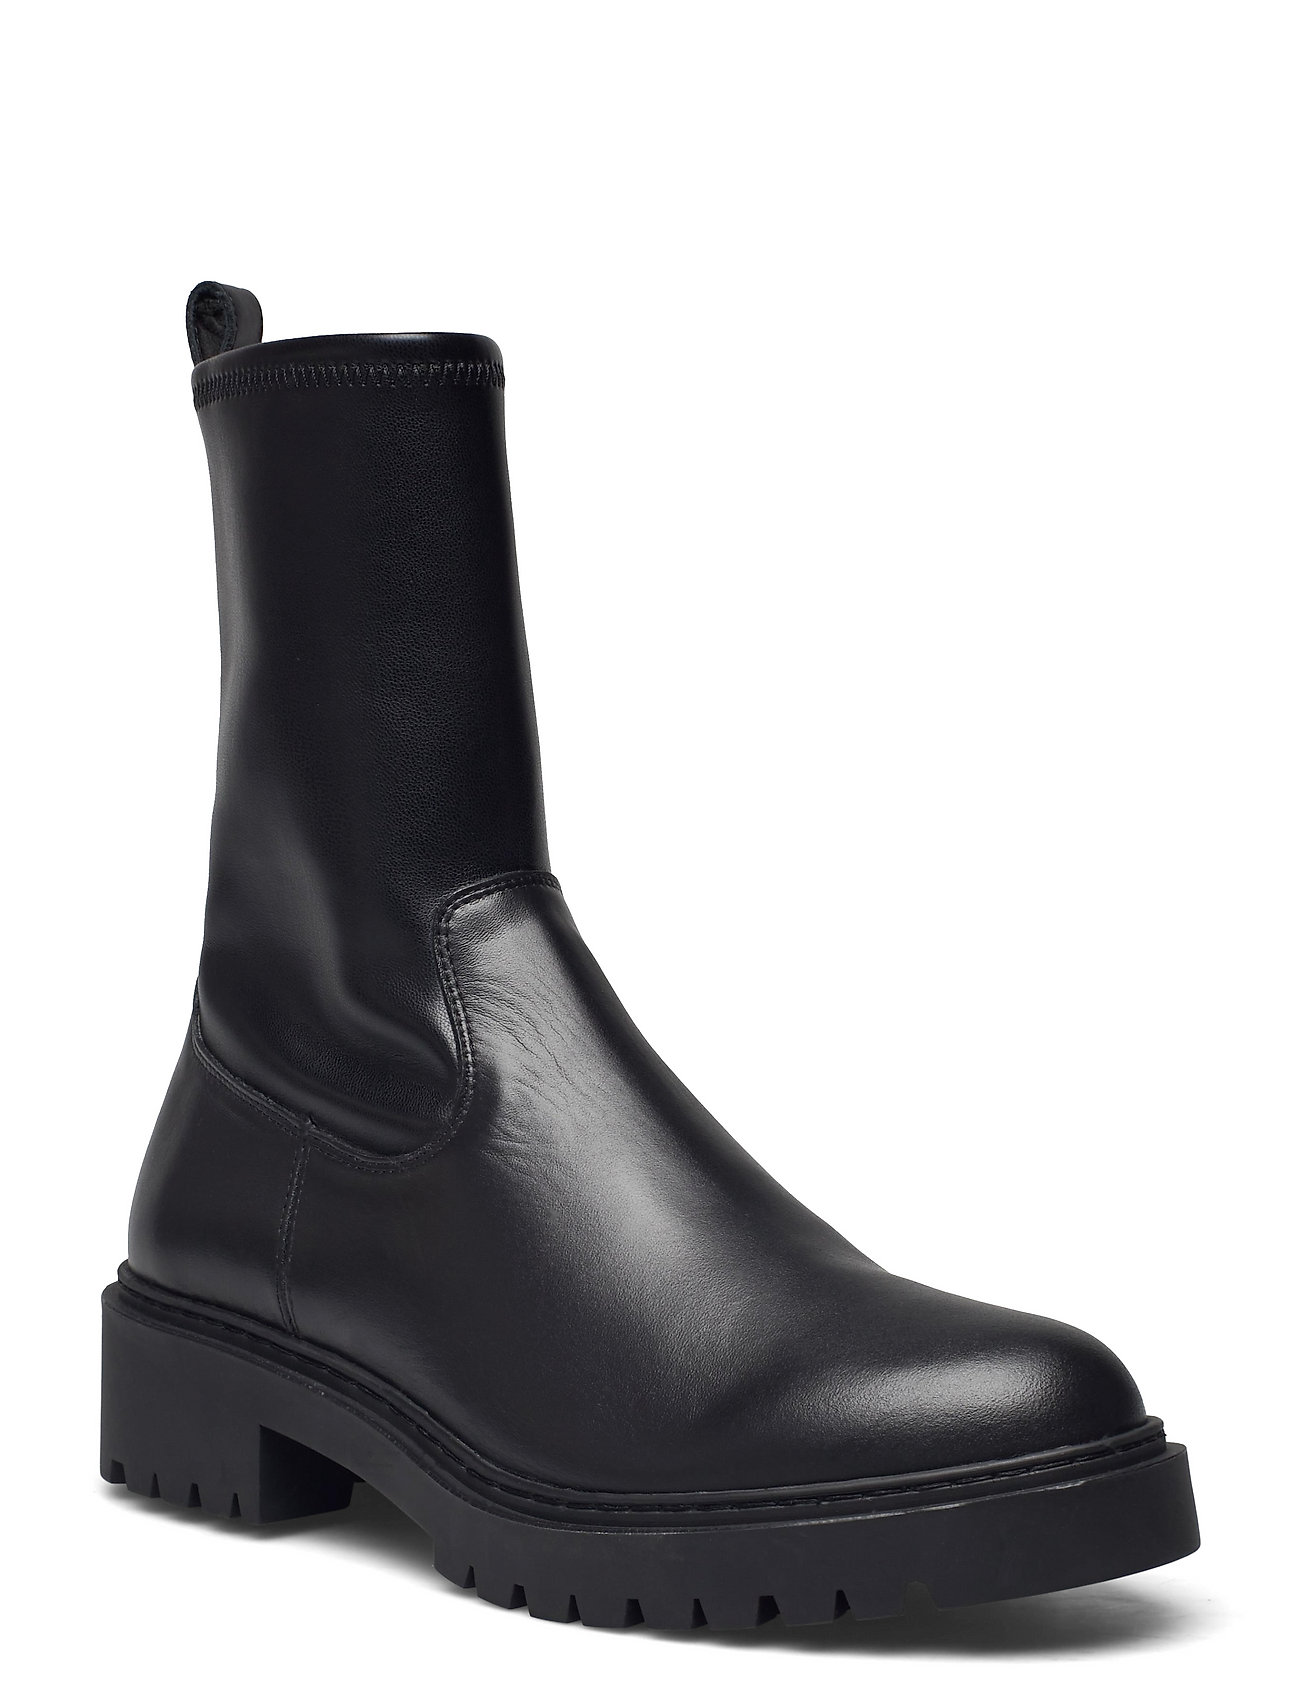 Guido_nf_stb Shoes Boots Ankle Boots Ankle Boot - Flat Musta UNISA